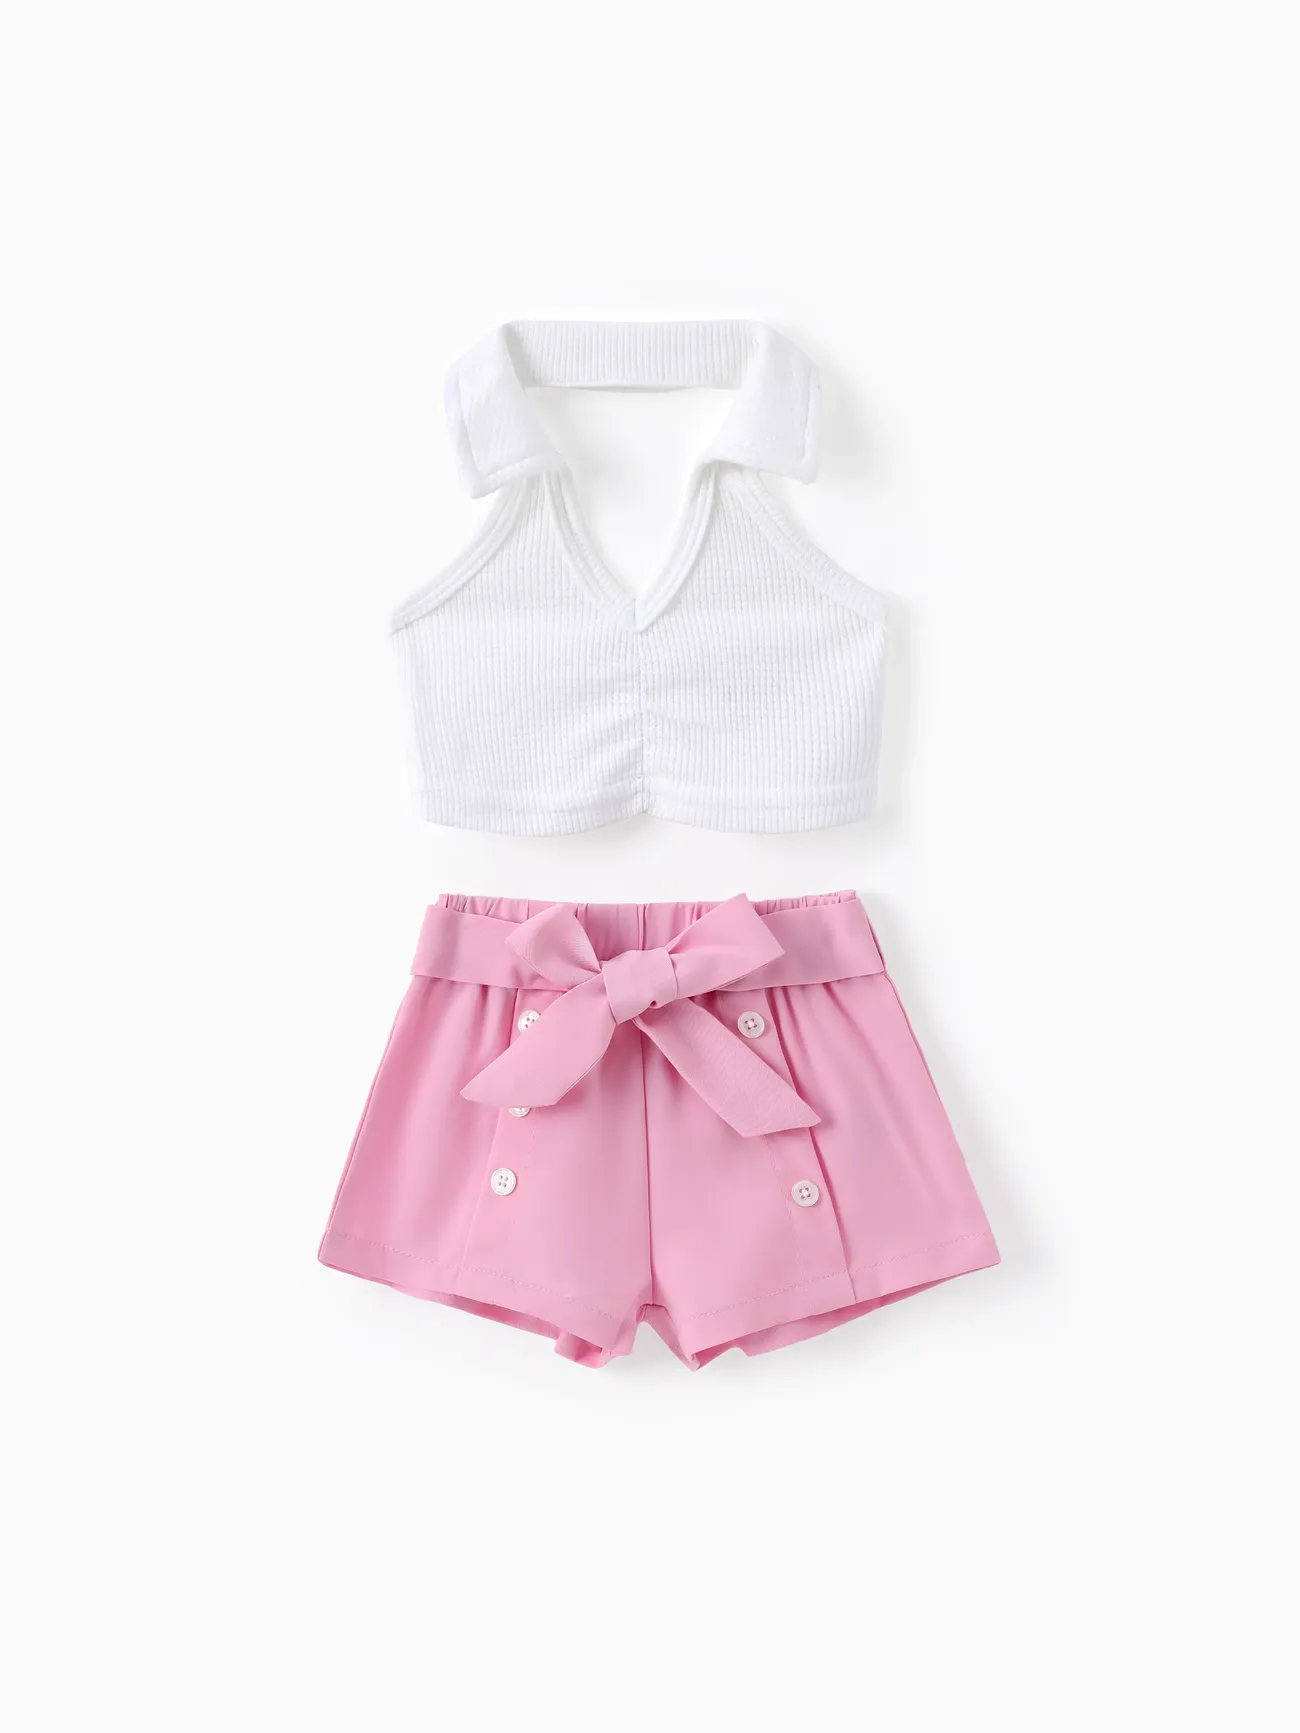 Baby Girl 2pcs Lapel Collar Top and Belted Shorts Set White big image 1